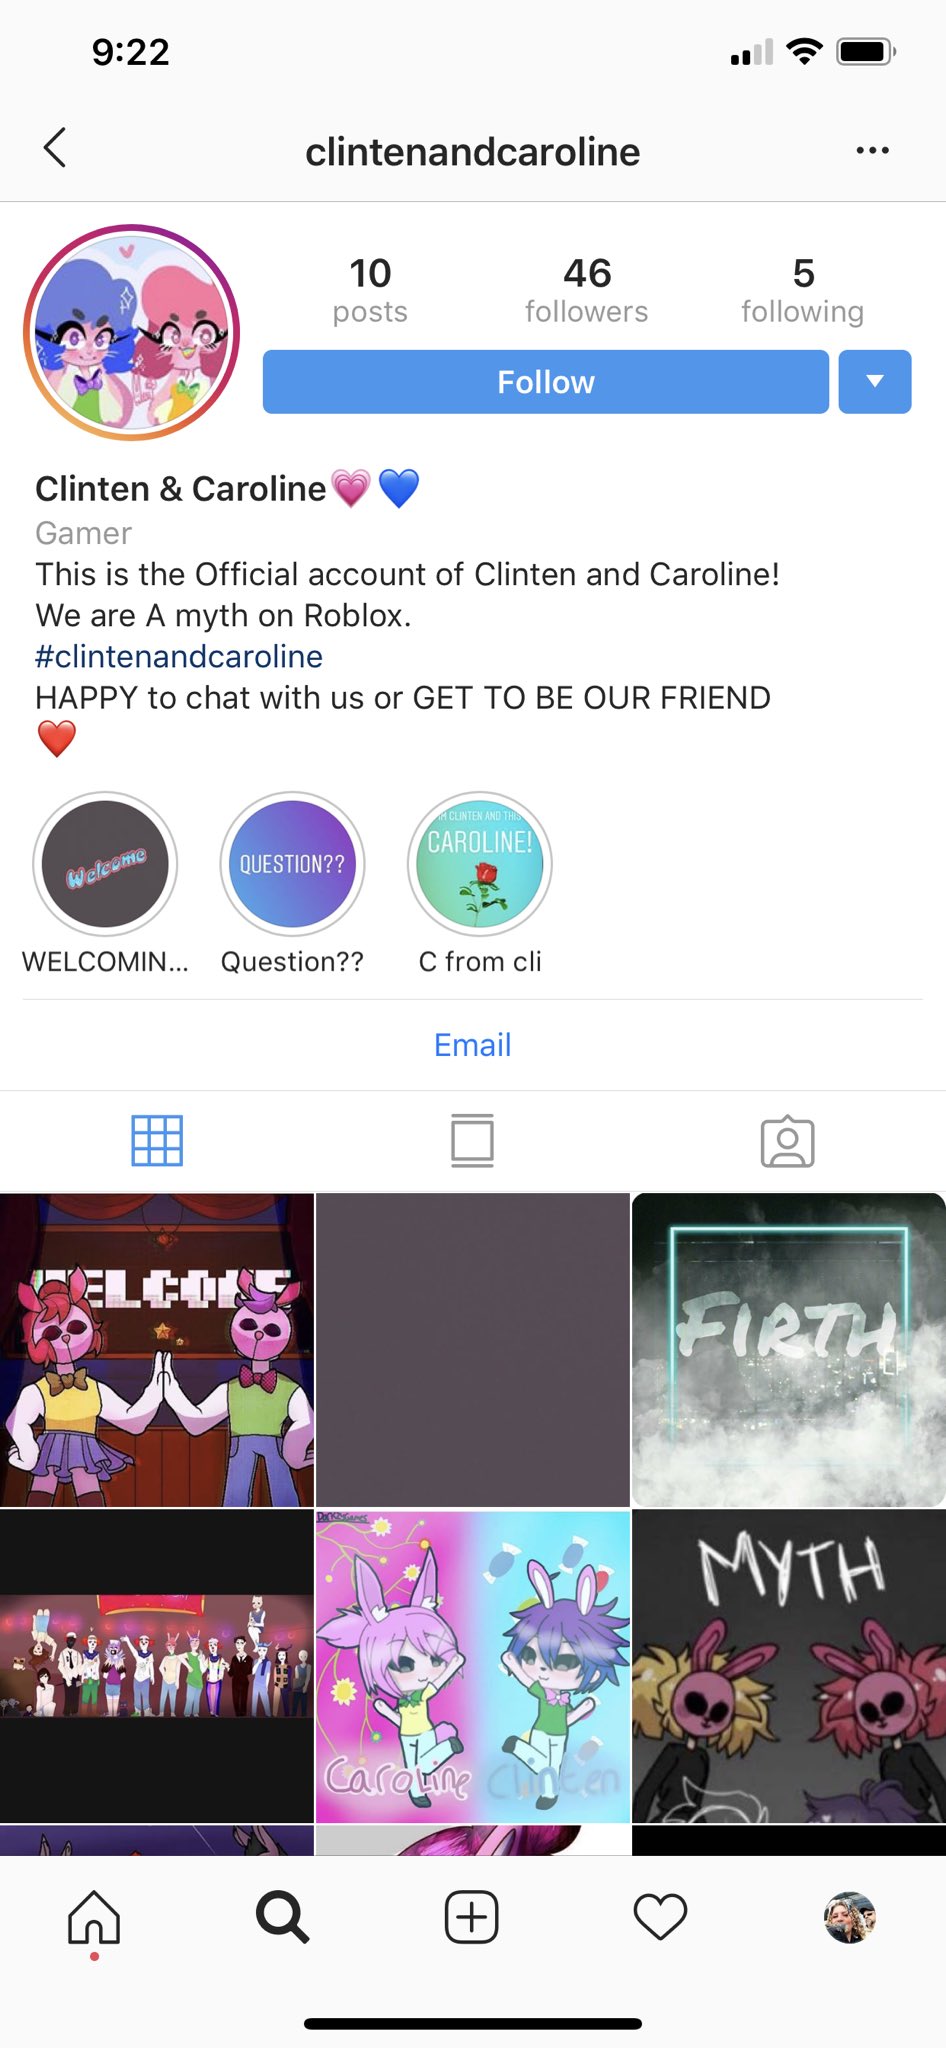 Caroline Clinten Blm On Twitter It Has Come To Our Attention By Our Good Friend Israel Sans That An Imposter Has Created An Instagram Account Under Our Name Is Fraudulently Saying - caroline roblox myth fanart